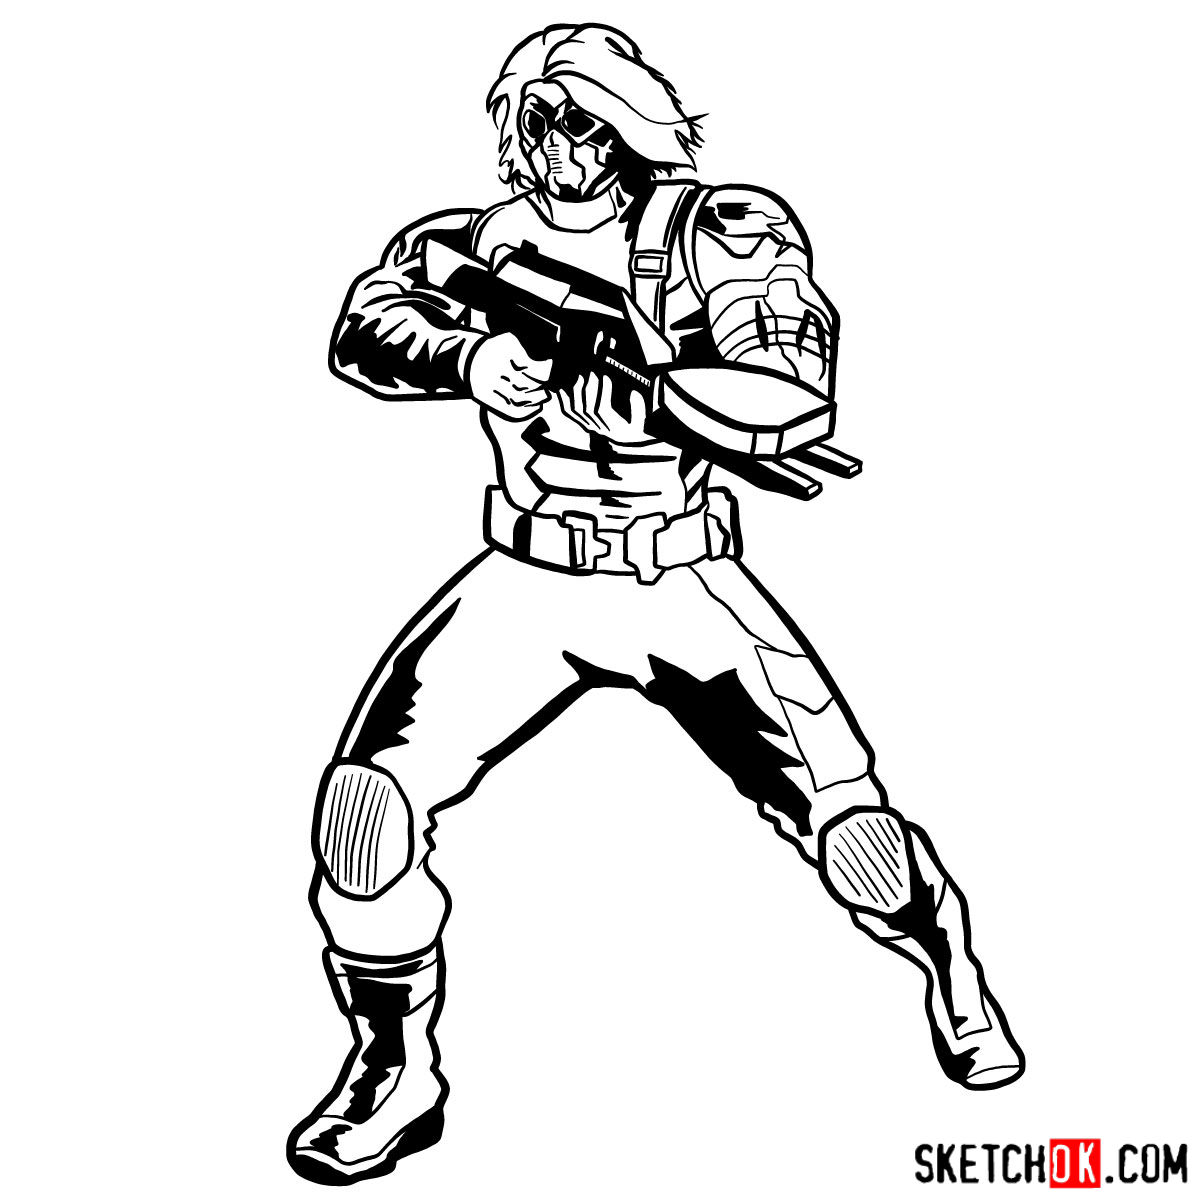 How to draw Bucky Barnes the Winter Soldier - Sketchok easy drawing guides